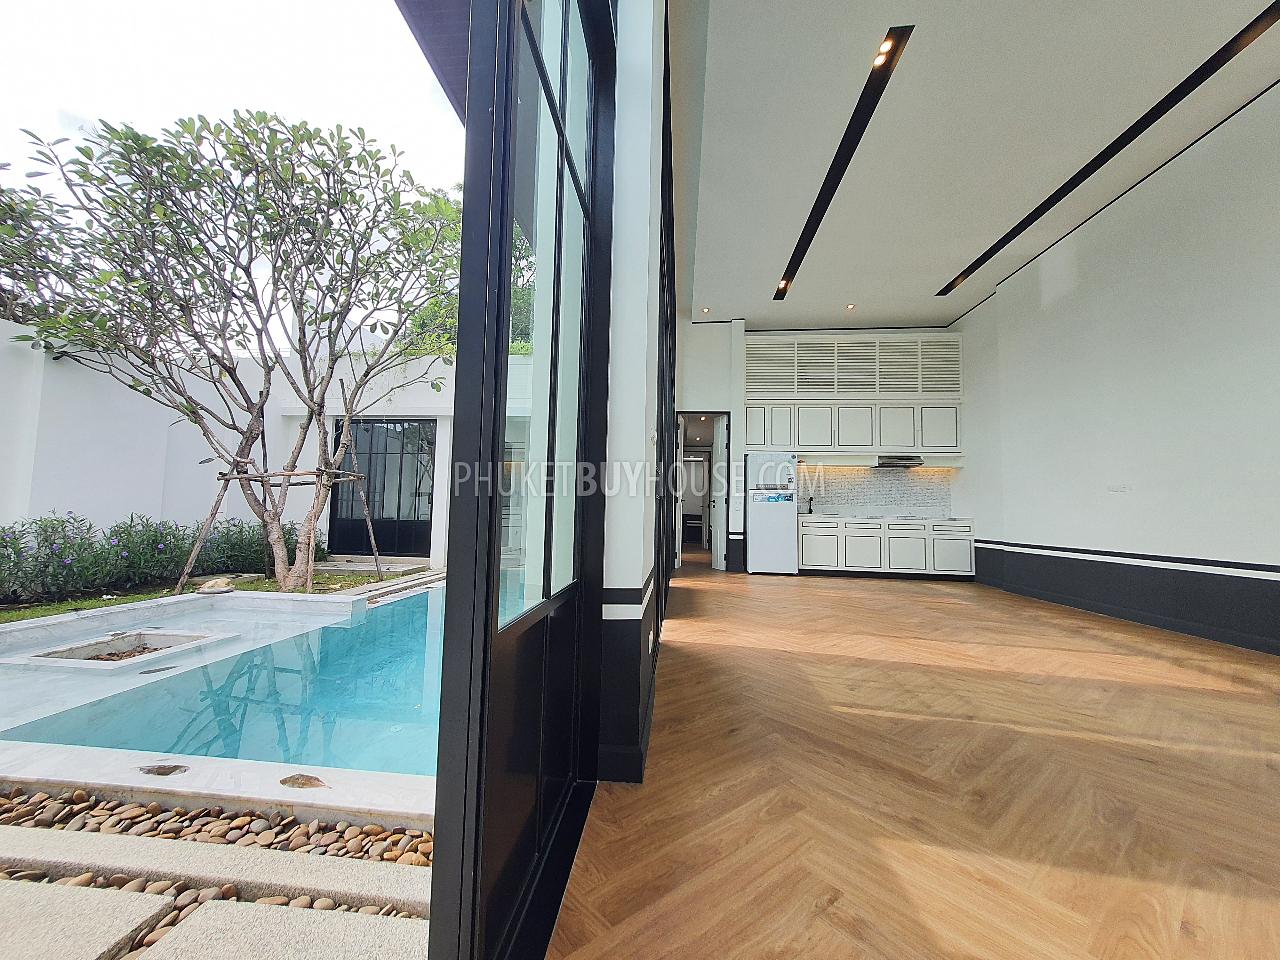 BAN6282: New Villa with 3 Bedrooms and Private Pool in a Convenient Area near Bang Tao. Photo #37